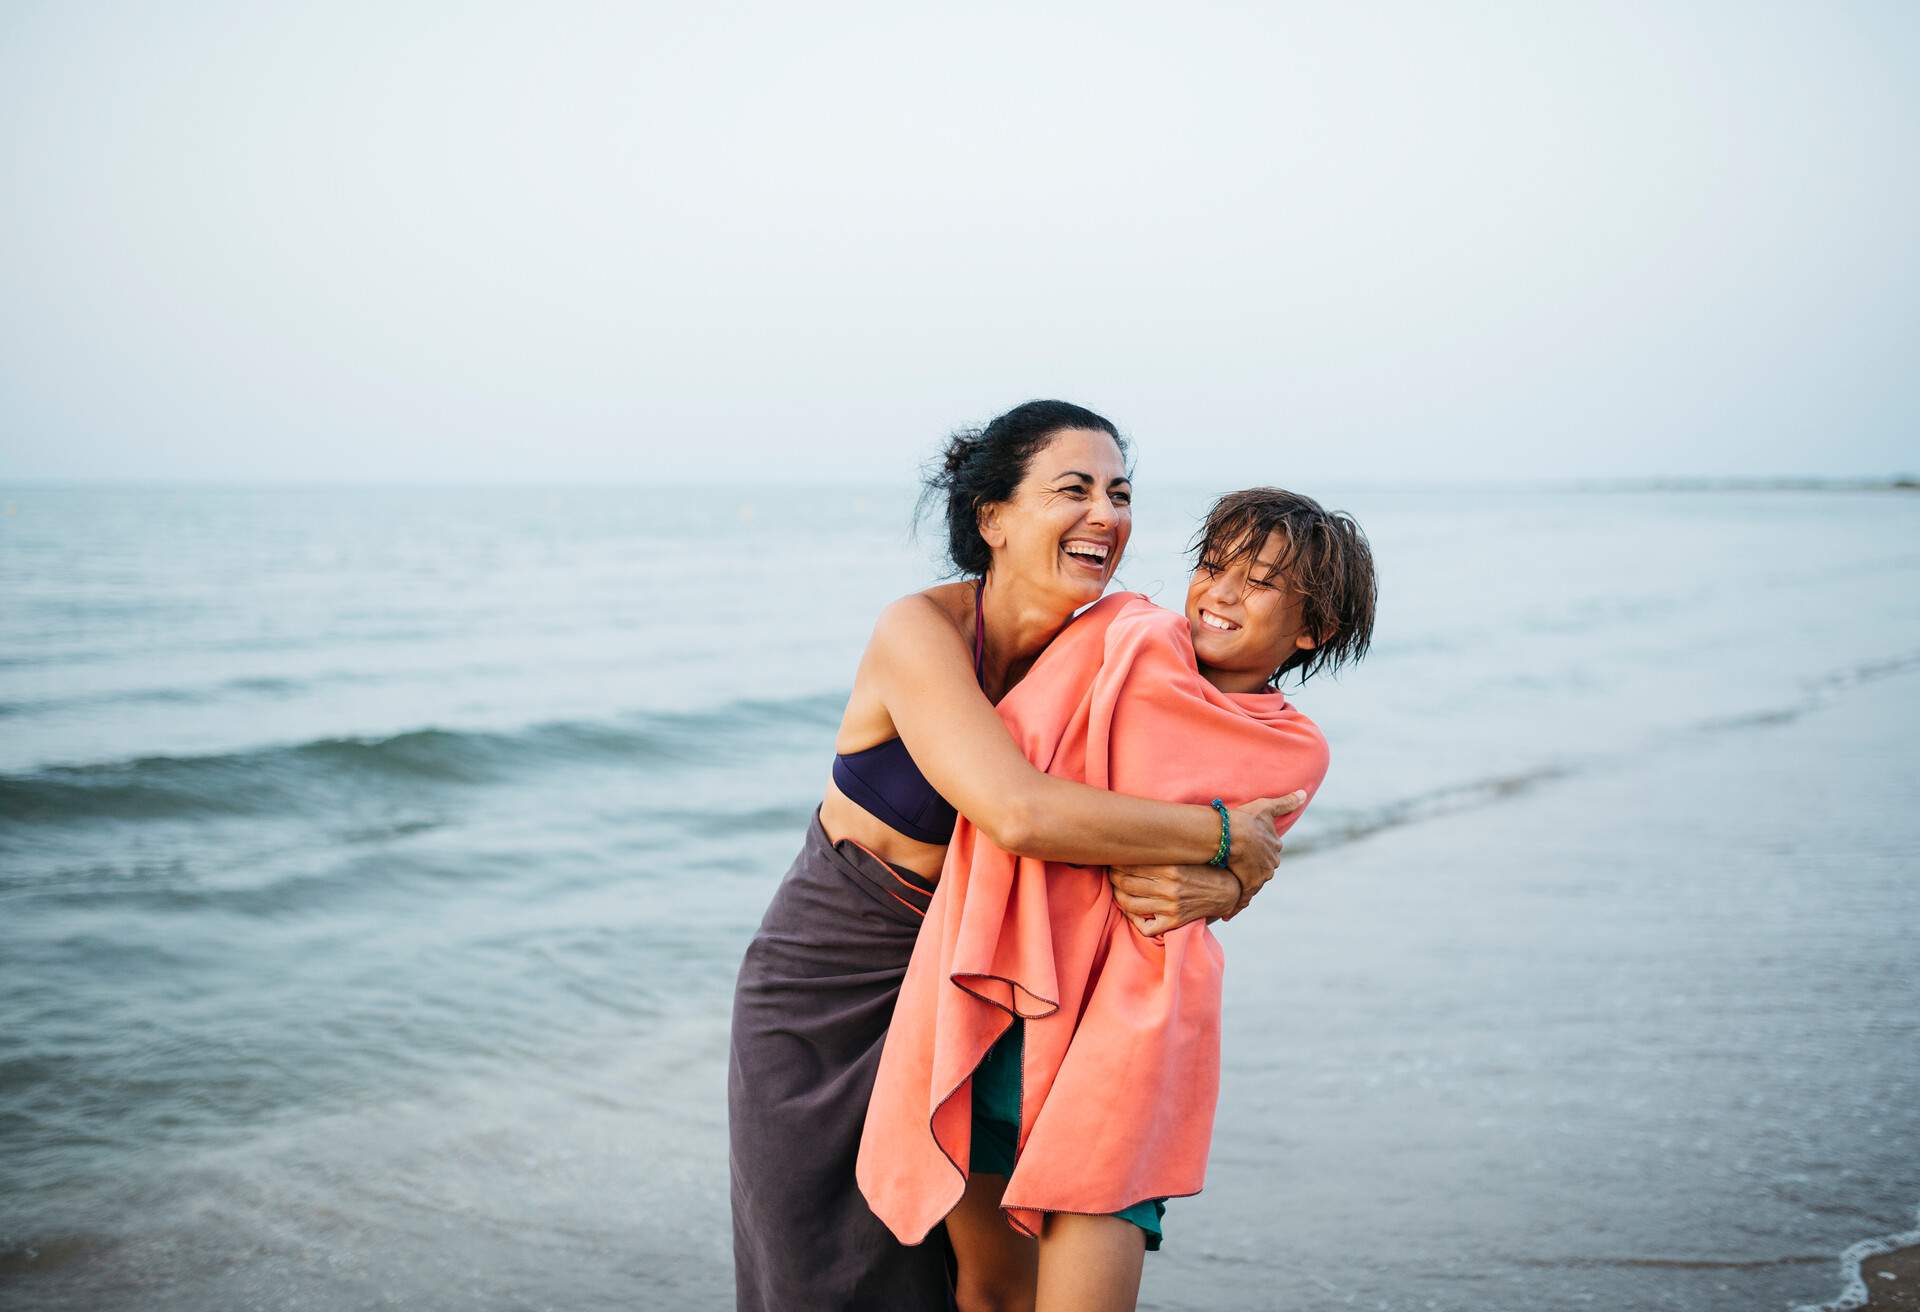 Portrait of a smiling mature woman and her twelve years old boy, embracing on the beach during sunset